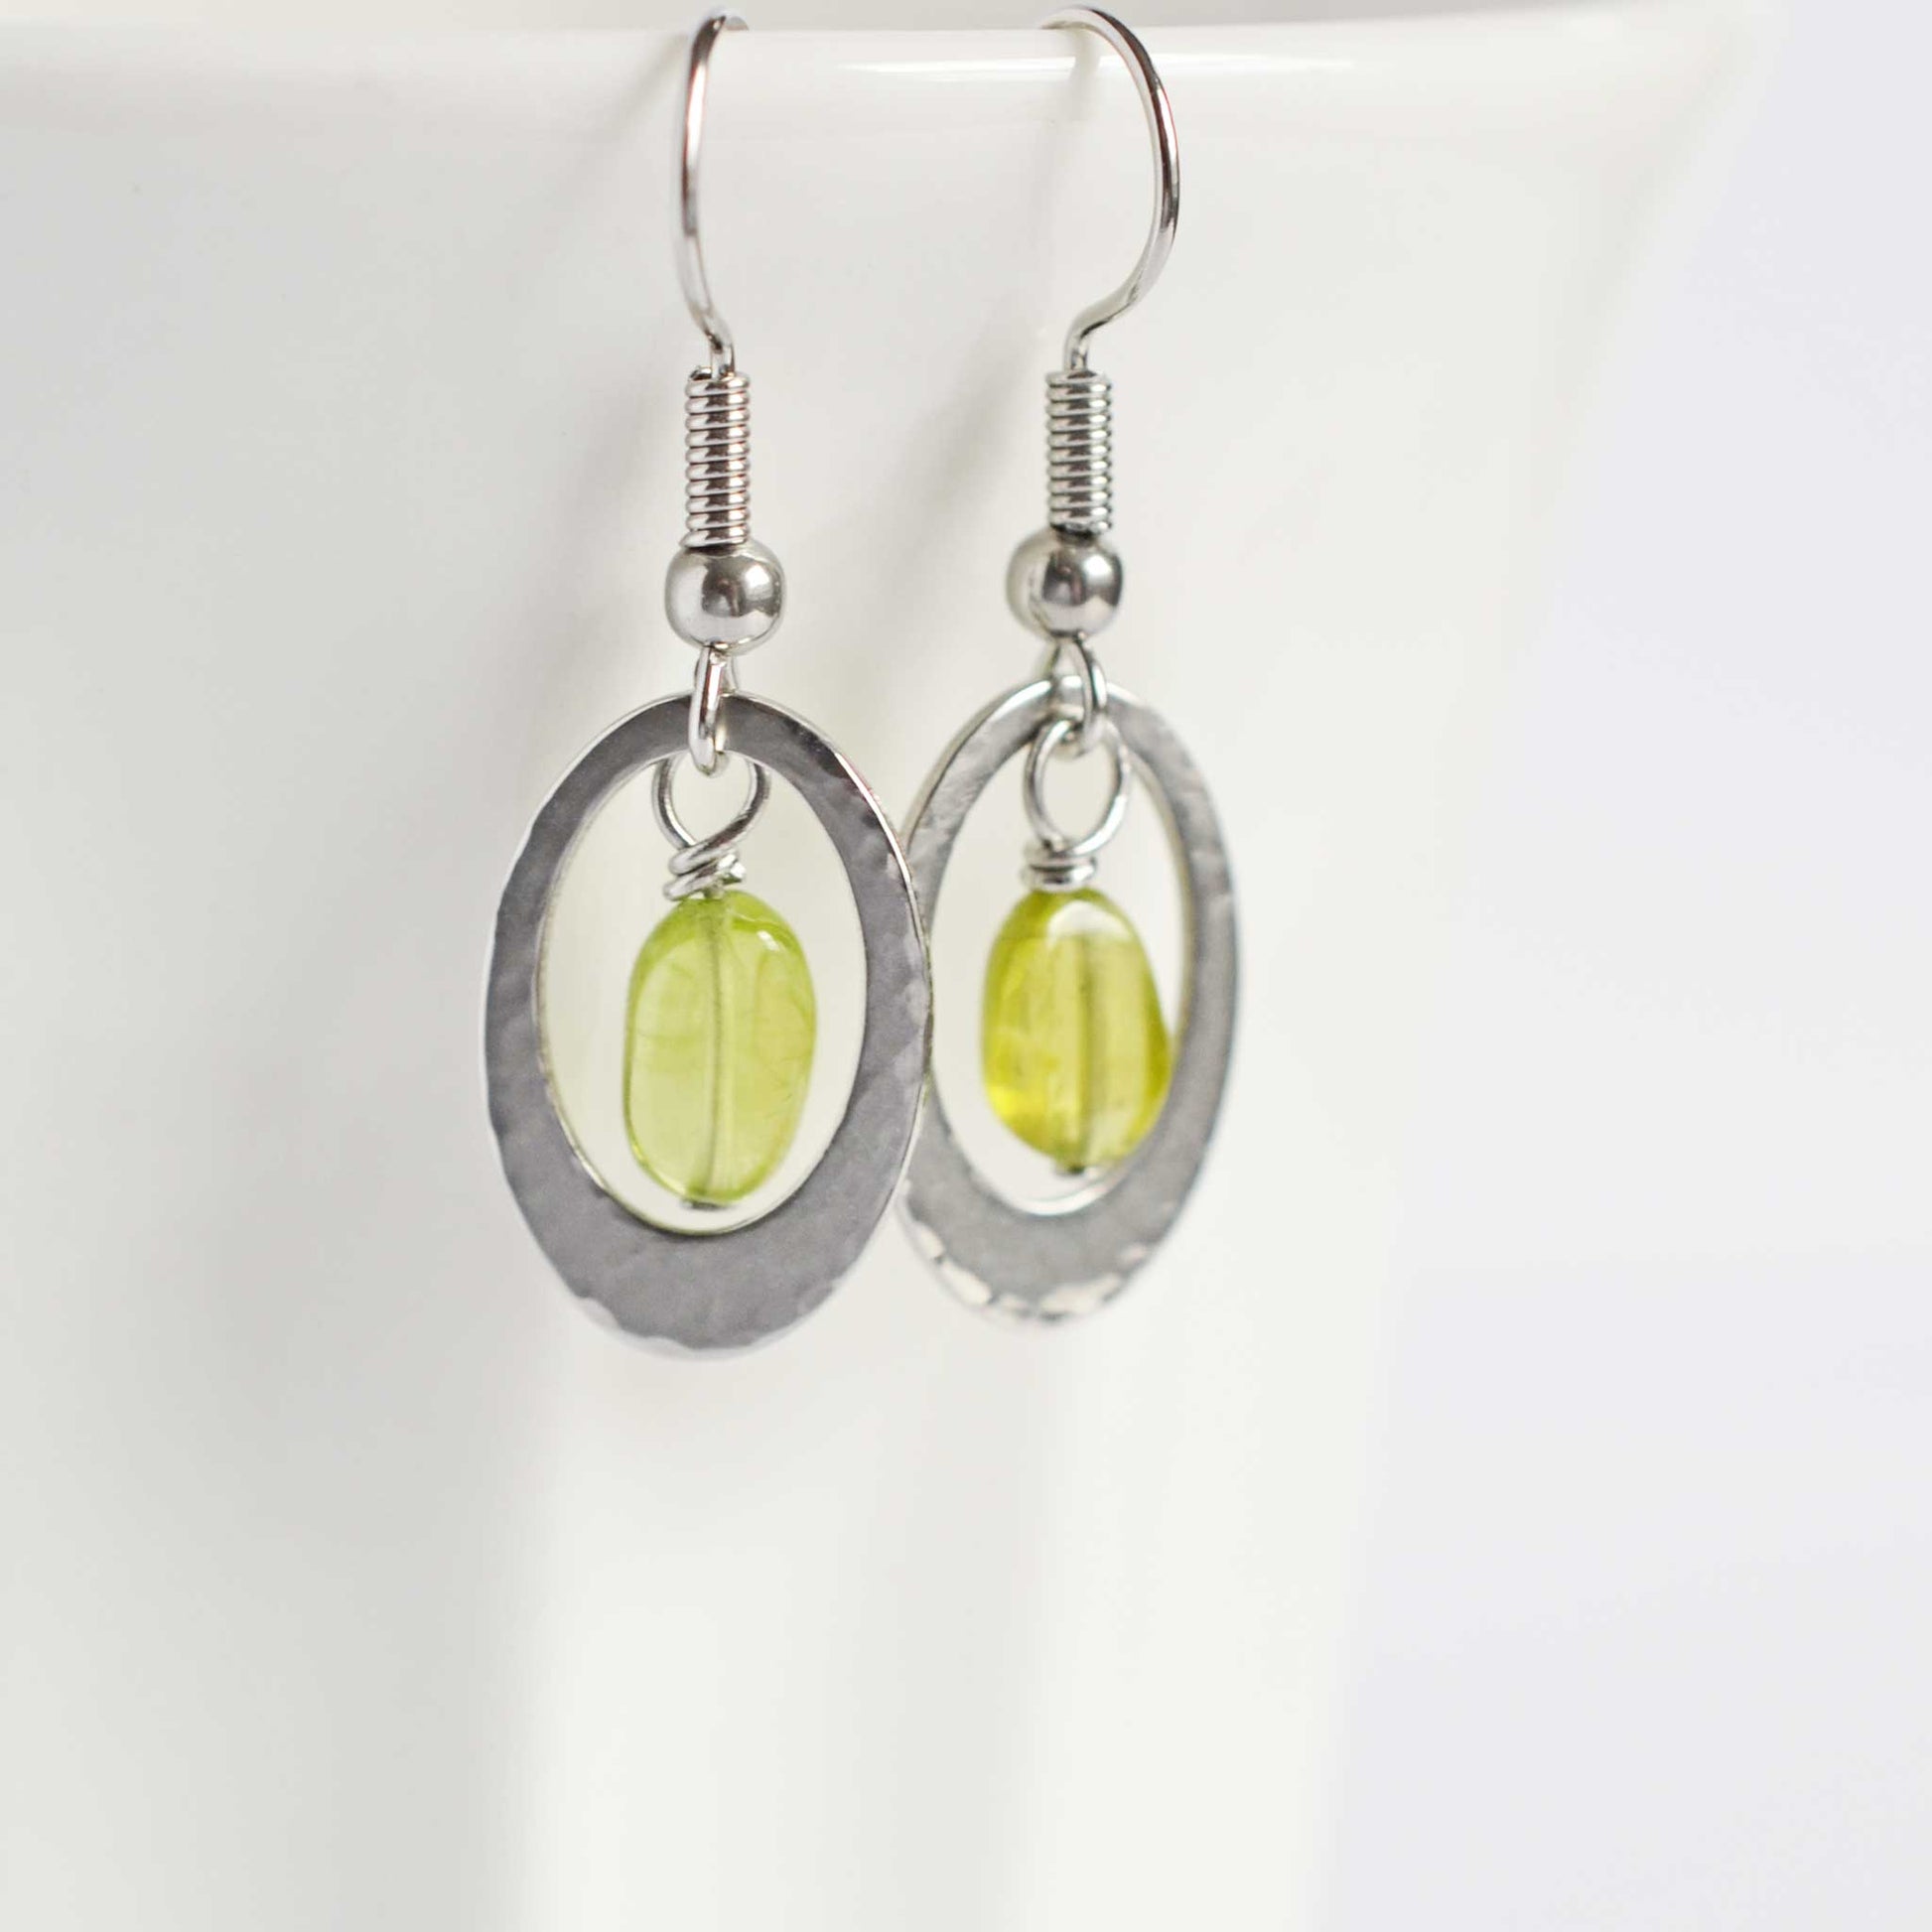 Green Peridot and steel oval drop earrings hanging on white cup.